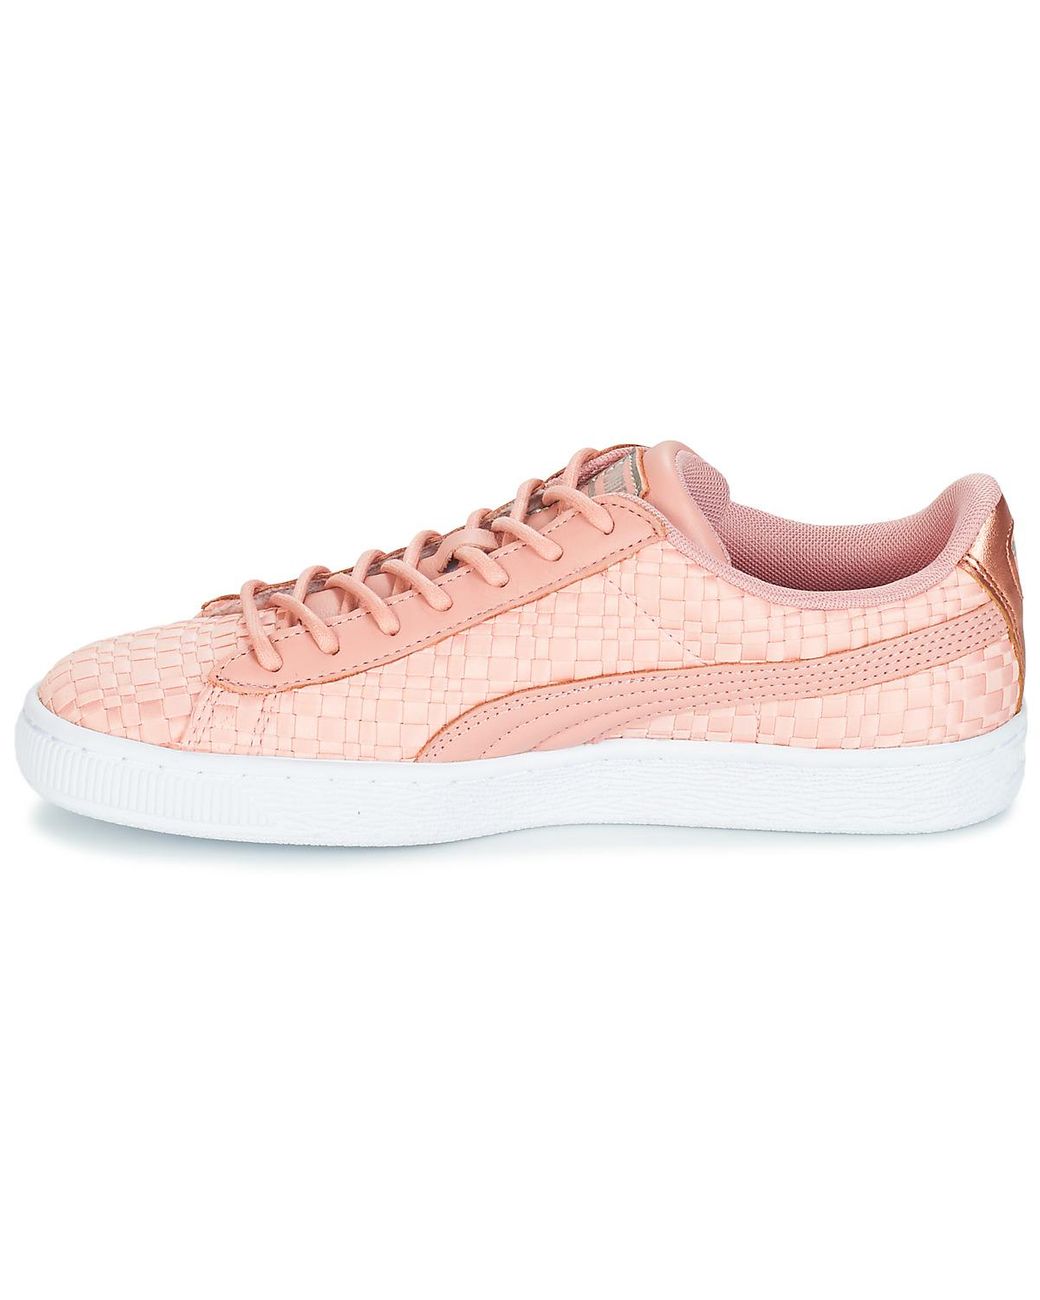 PUMA Basket Satin Ep Wn's Shoes (trainers) in Pink - Save 30% - Lyst